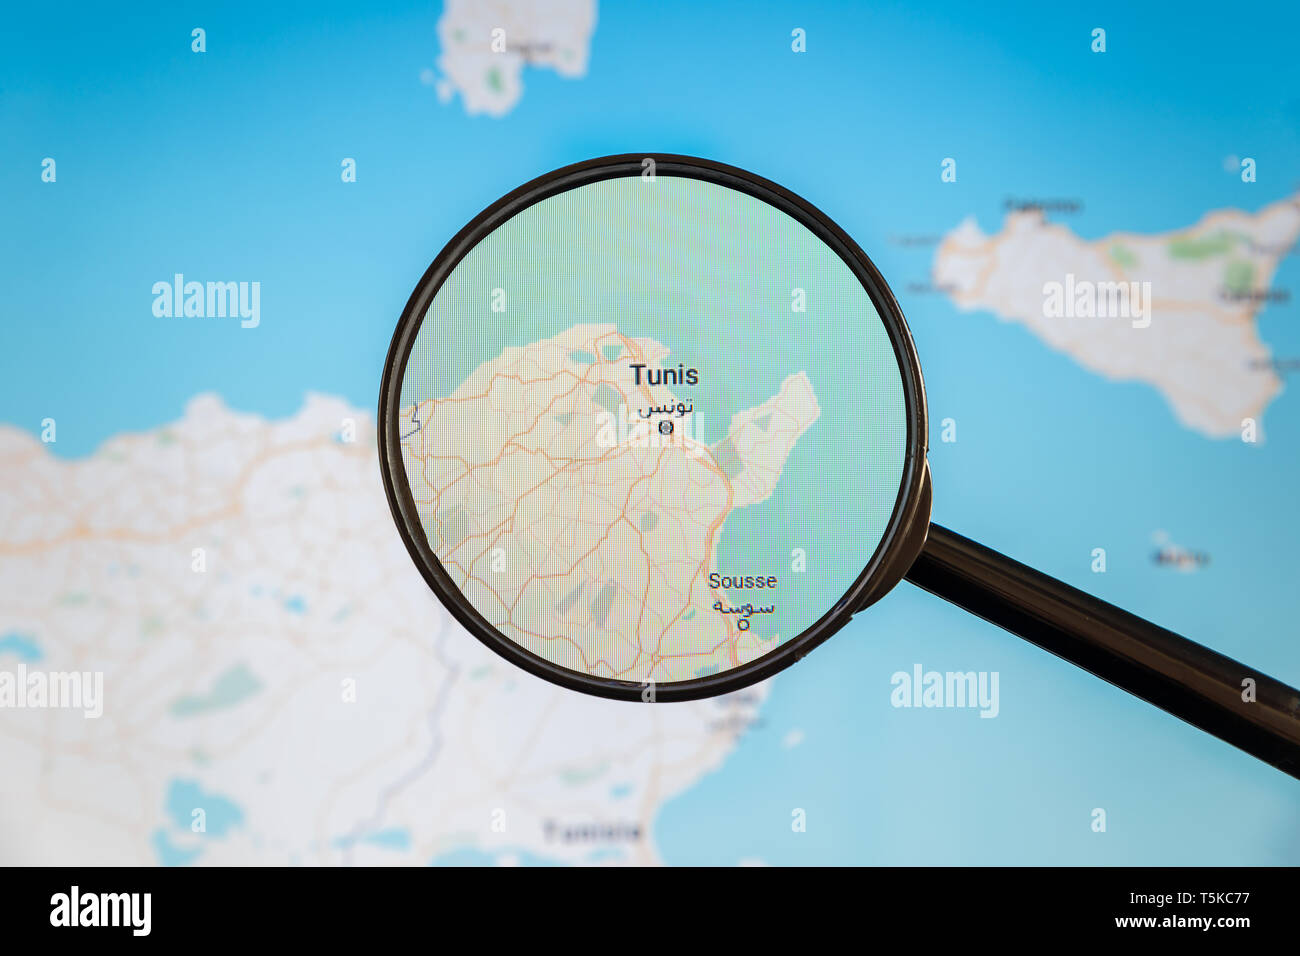 Tunis, Tunisia. Political map. City visualization illustrative concept on display screen through magnifying glass. Stock Photo